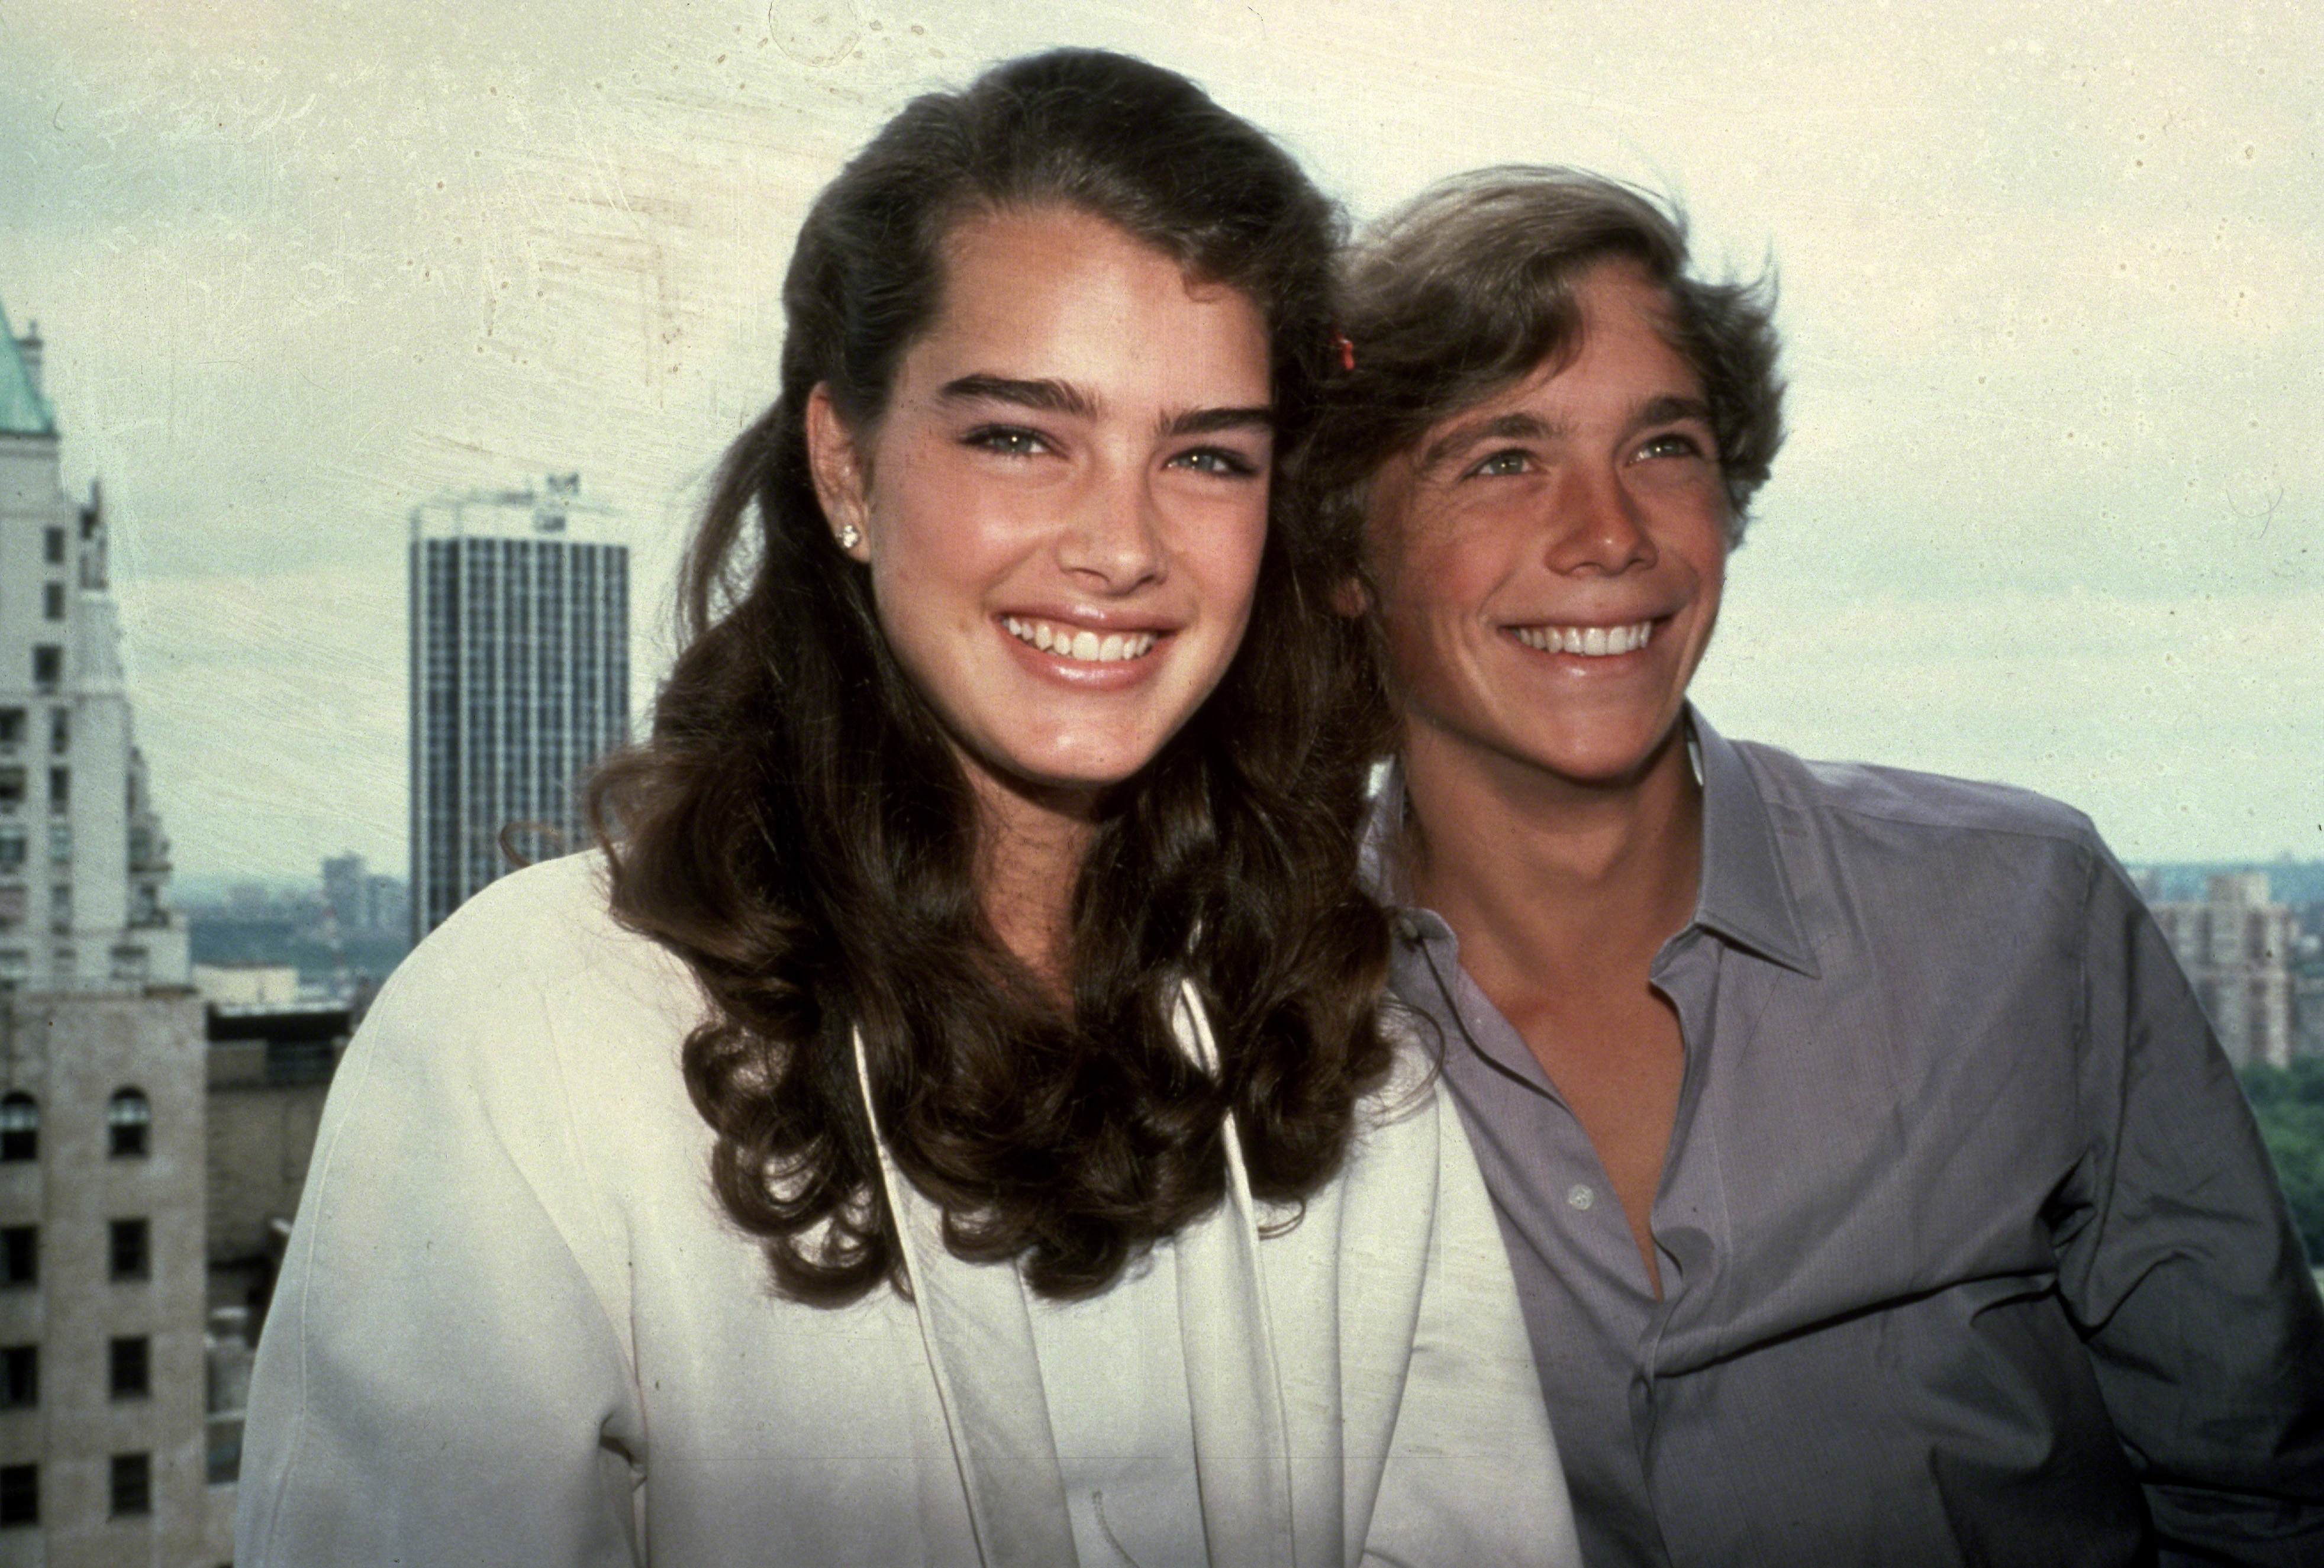 Brooke Shields and Christopher Atkins in New York, circa 1980. | Source: Getty Images